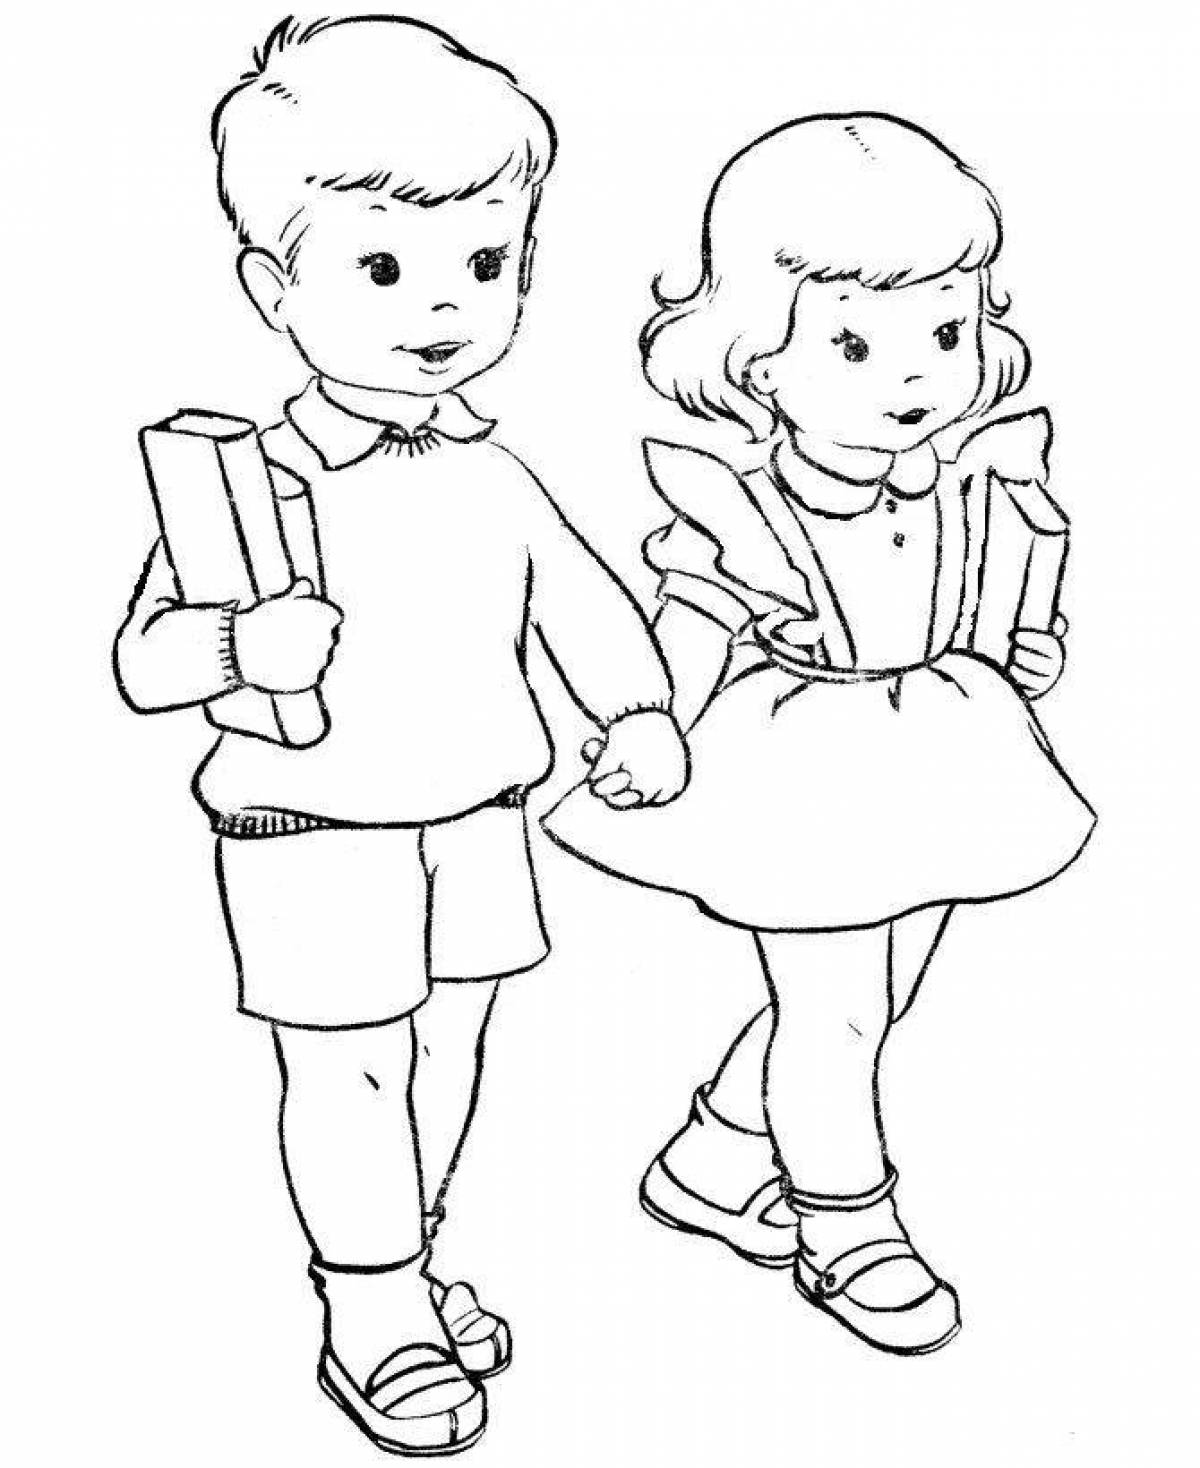 Sweet coloring pages for boys and girls